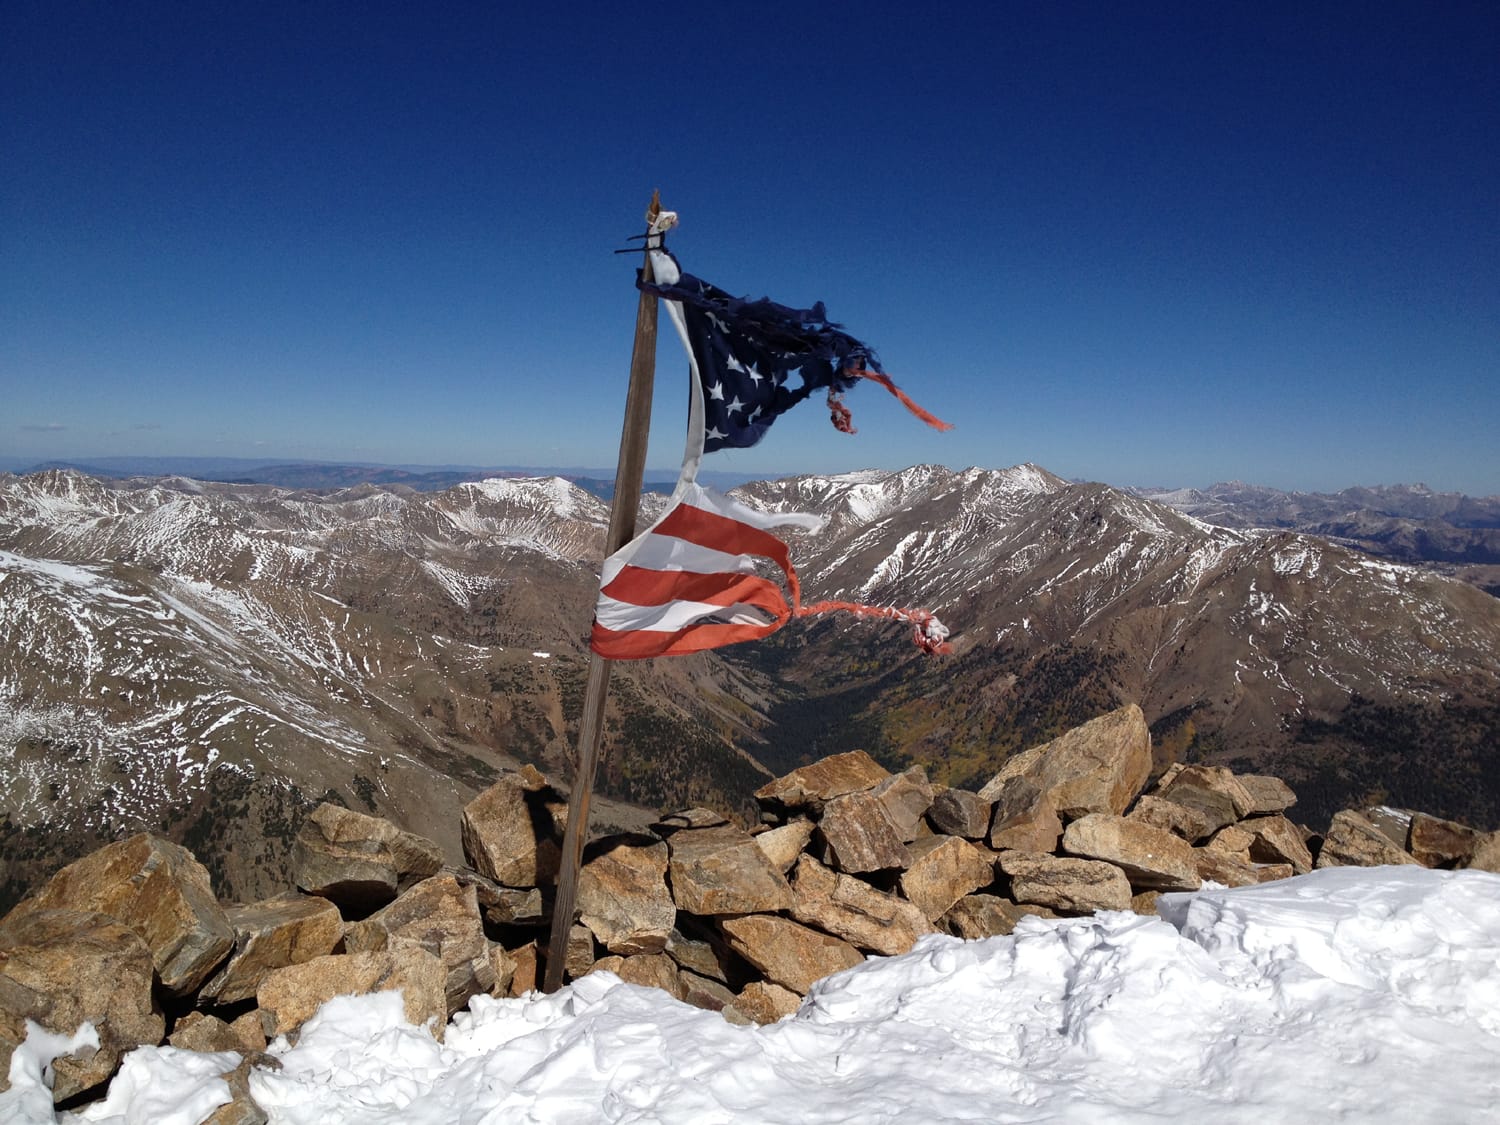 Highpointing - reaching the highest point in every U.S. state